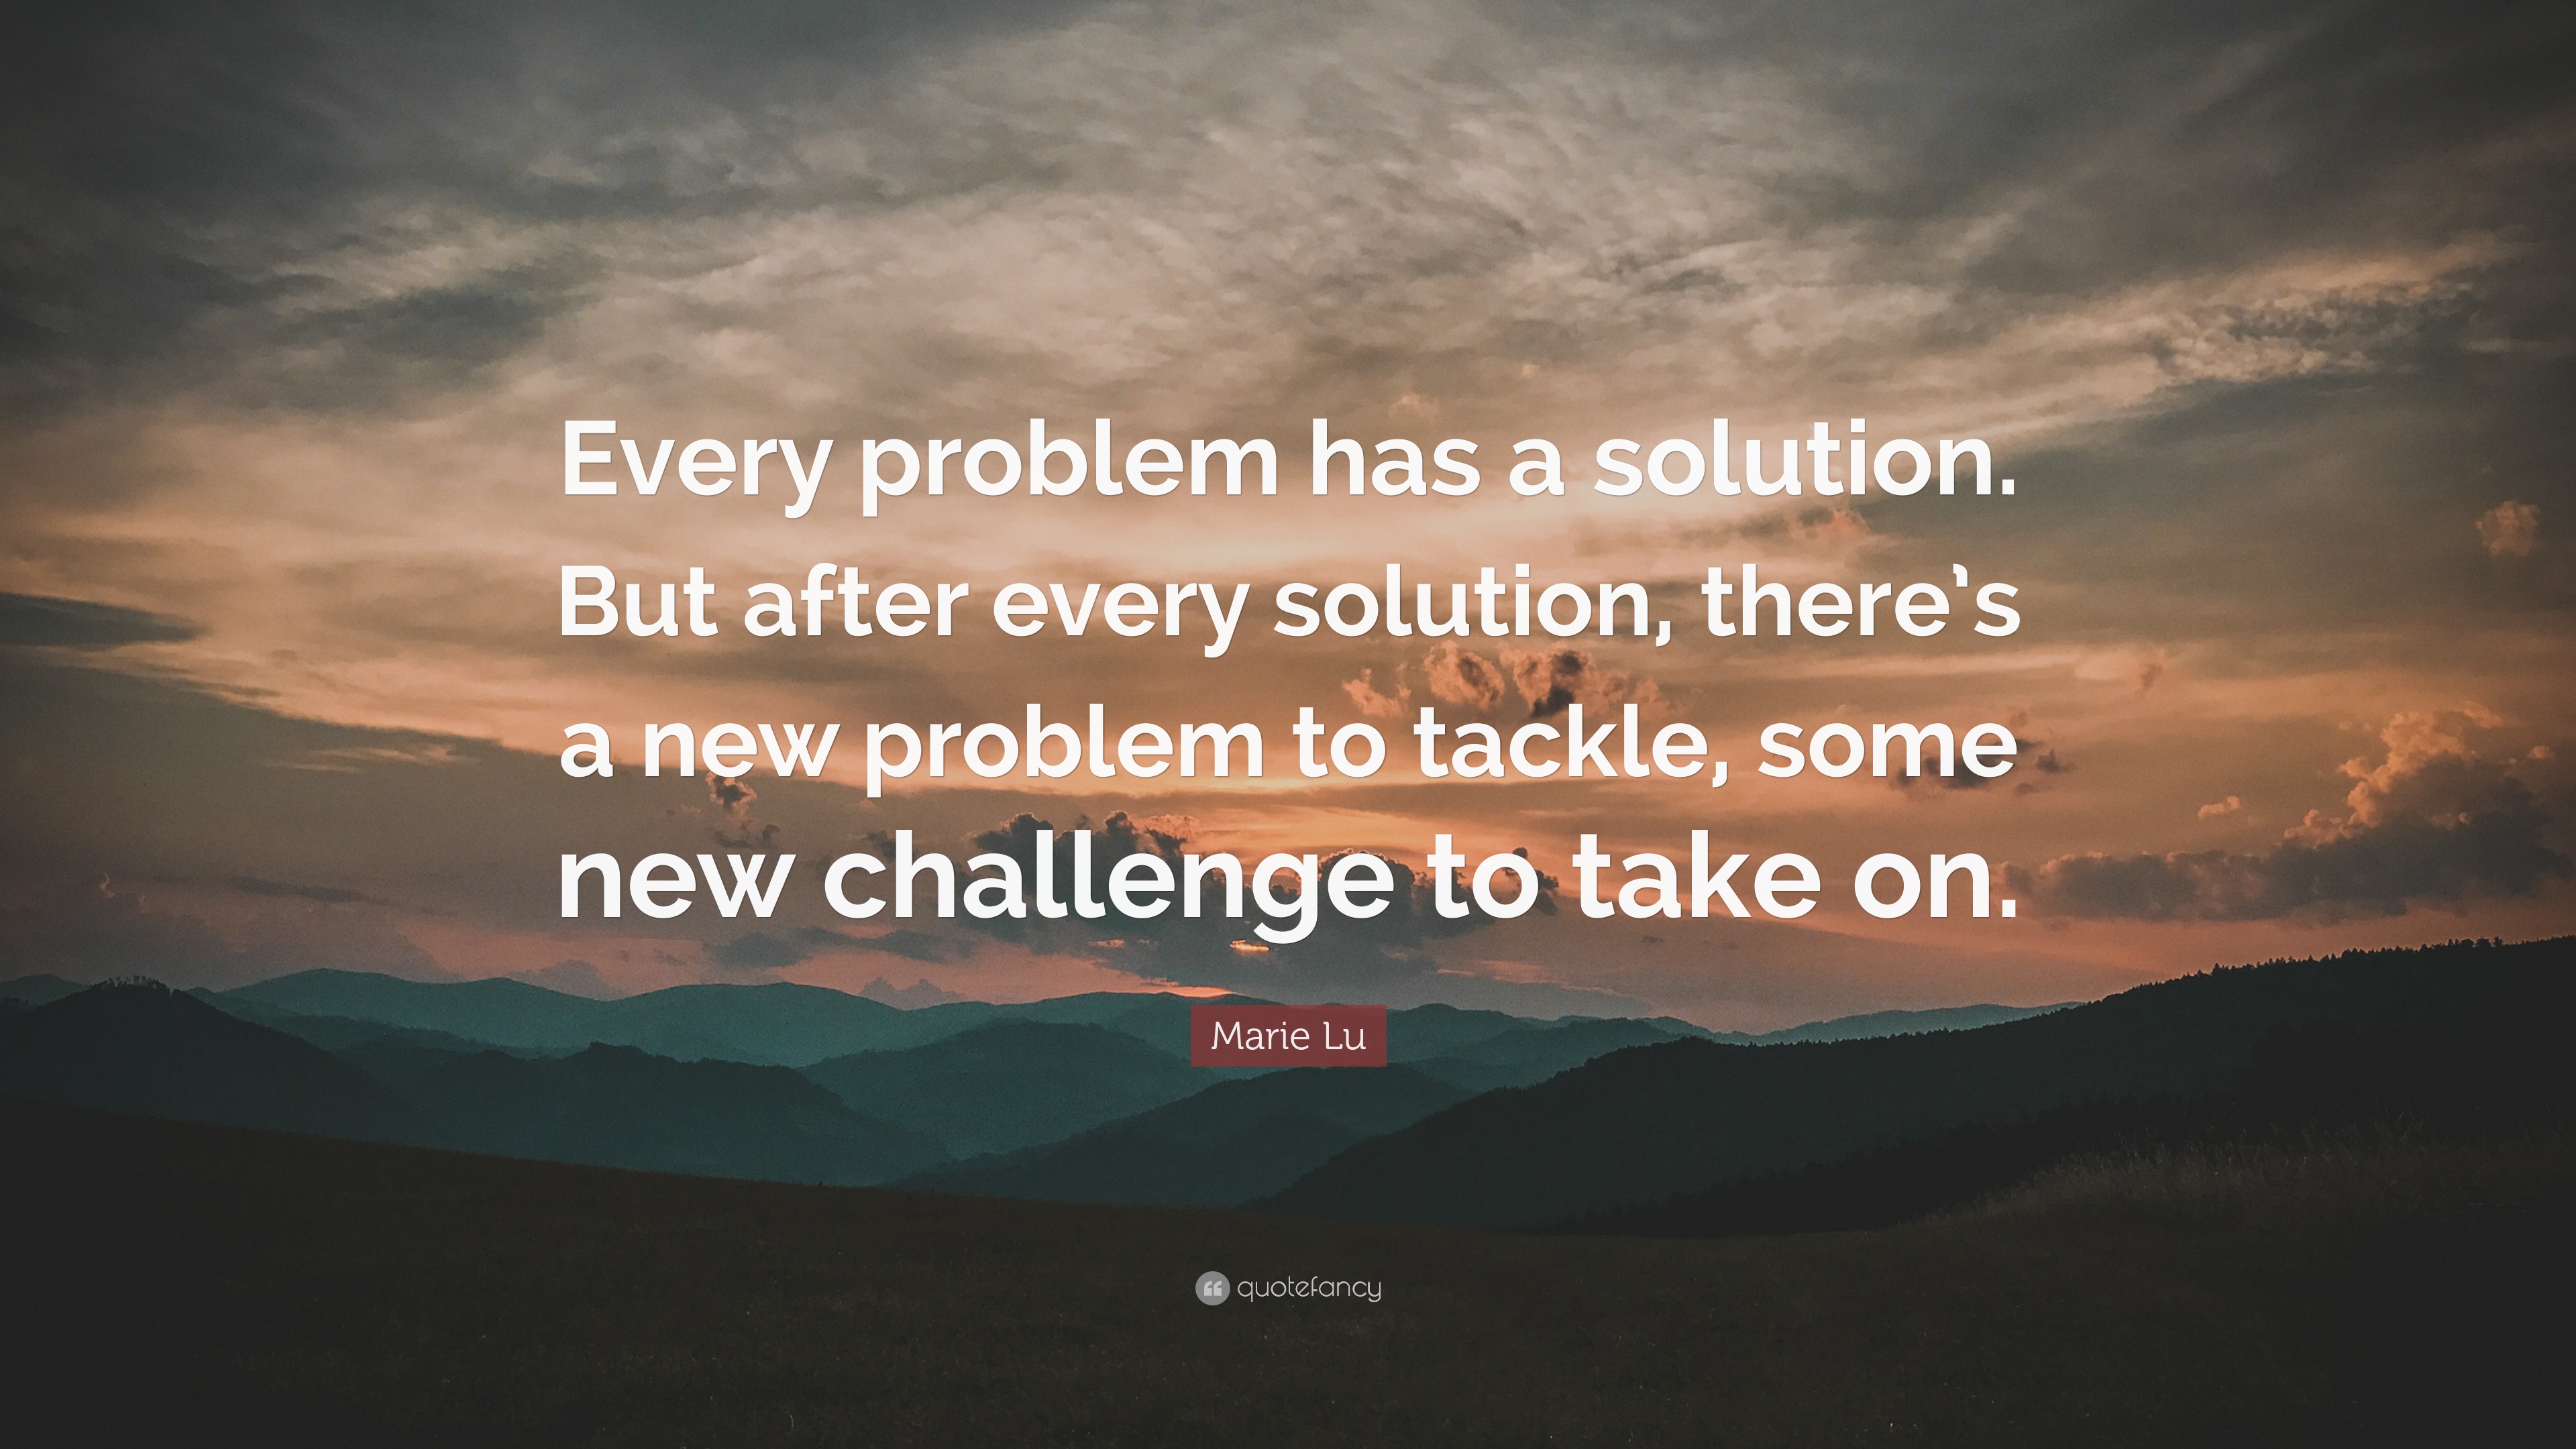 Marie Lu Quote: “Every problem has a solution. But after every